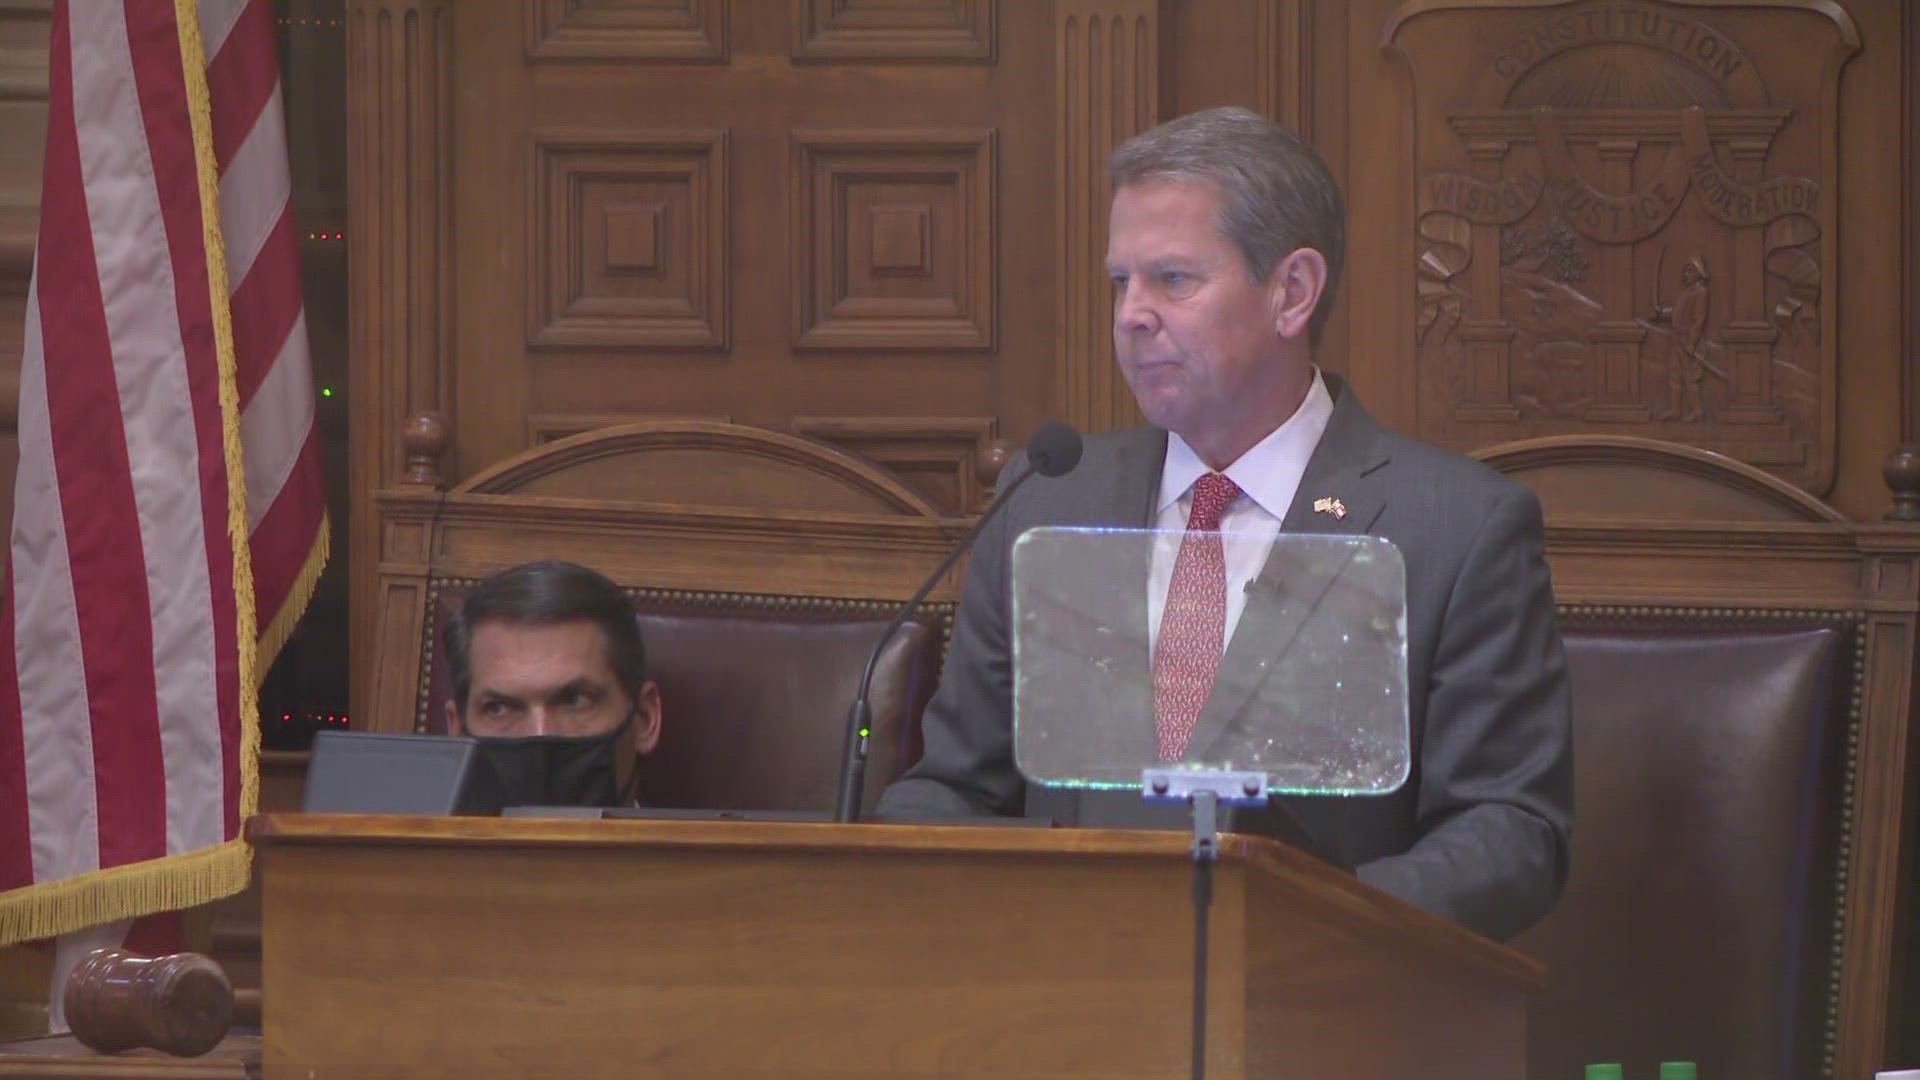 Gov. Kemp stated he will work to protect students against what he called "divisive ideologies."